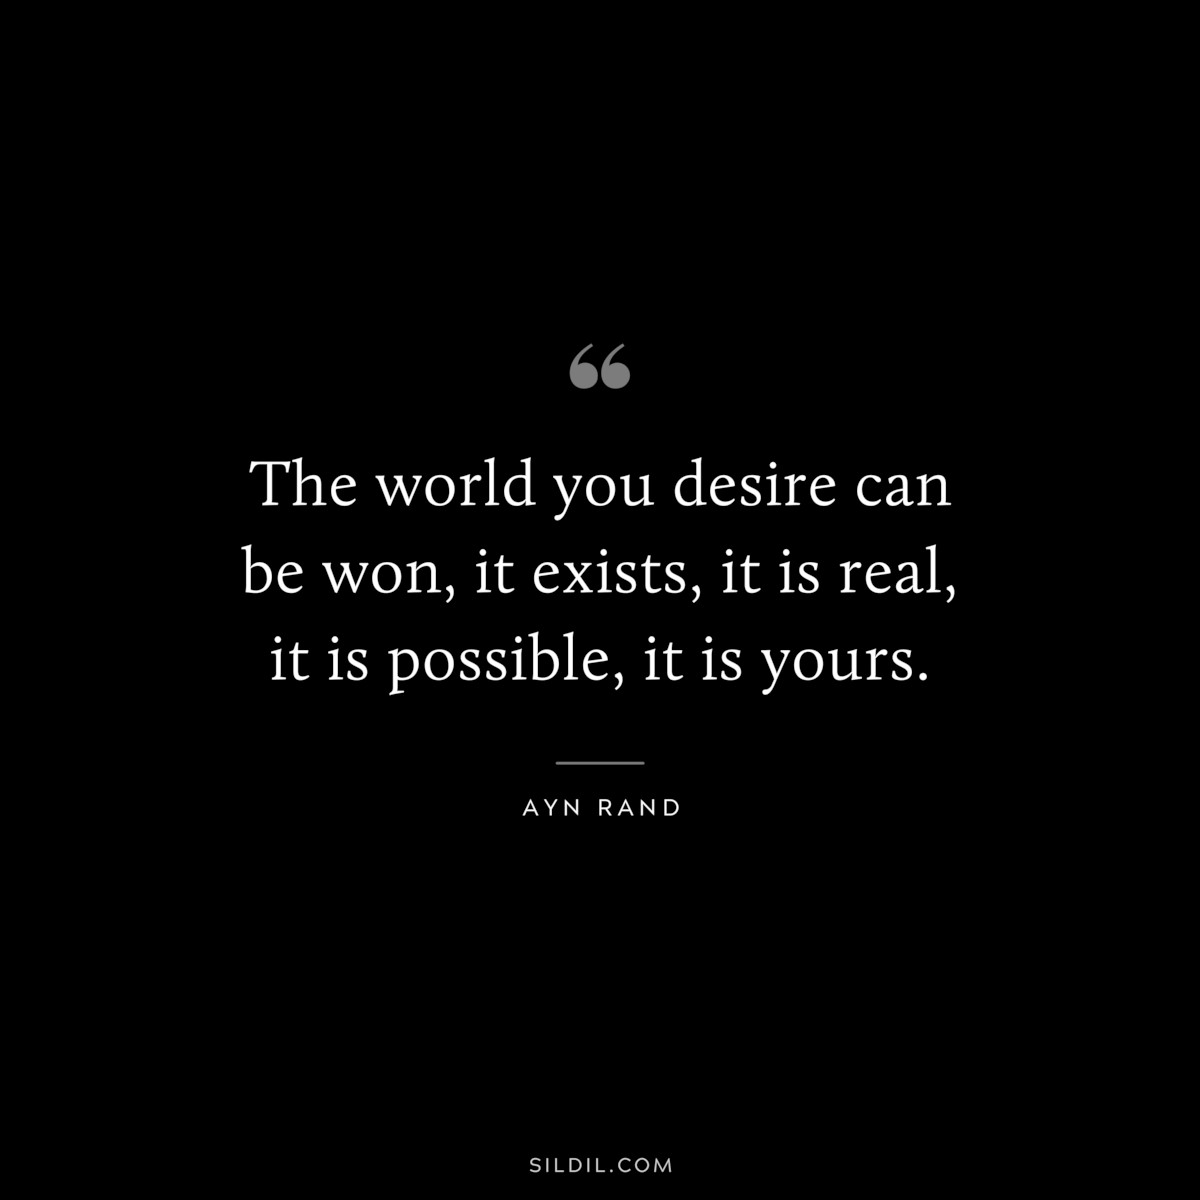 The world you desire can be won, it exists, it is real, it is possible, it is yours. ― Ayn Rand